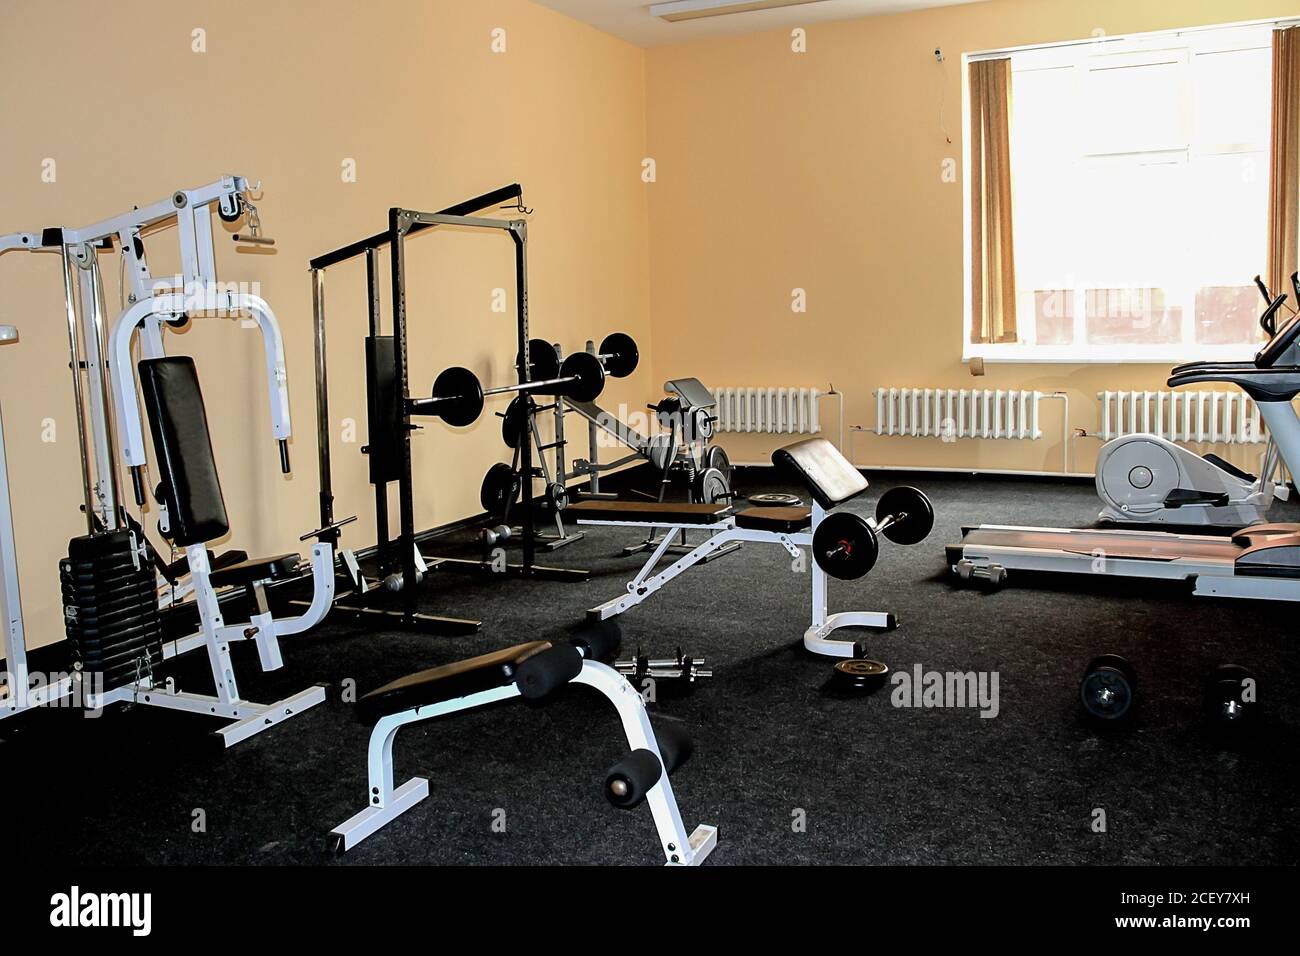 Small gym room with exercise equipments. House interior. Sport, fitness, amateur home gym. Stock Photo